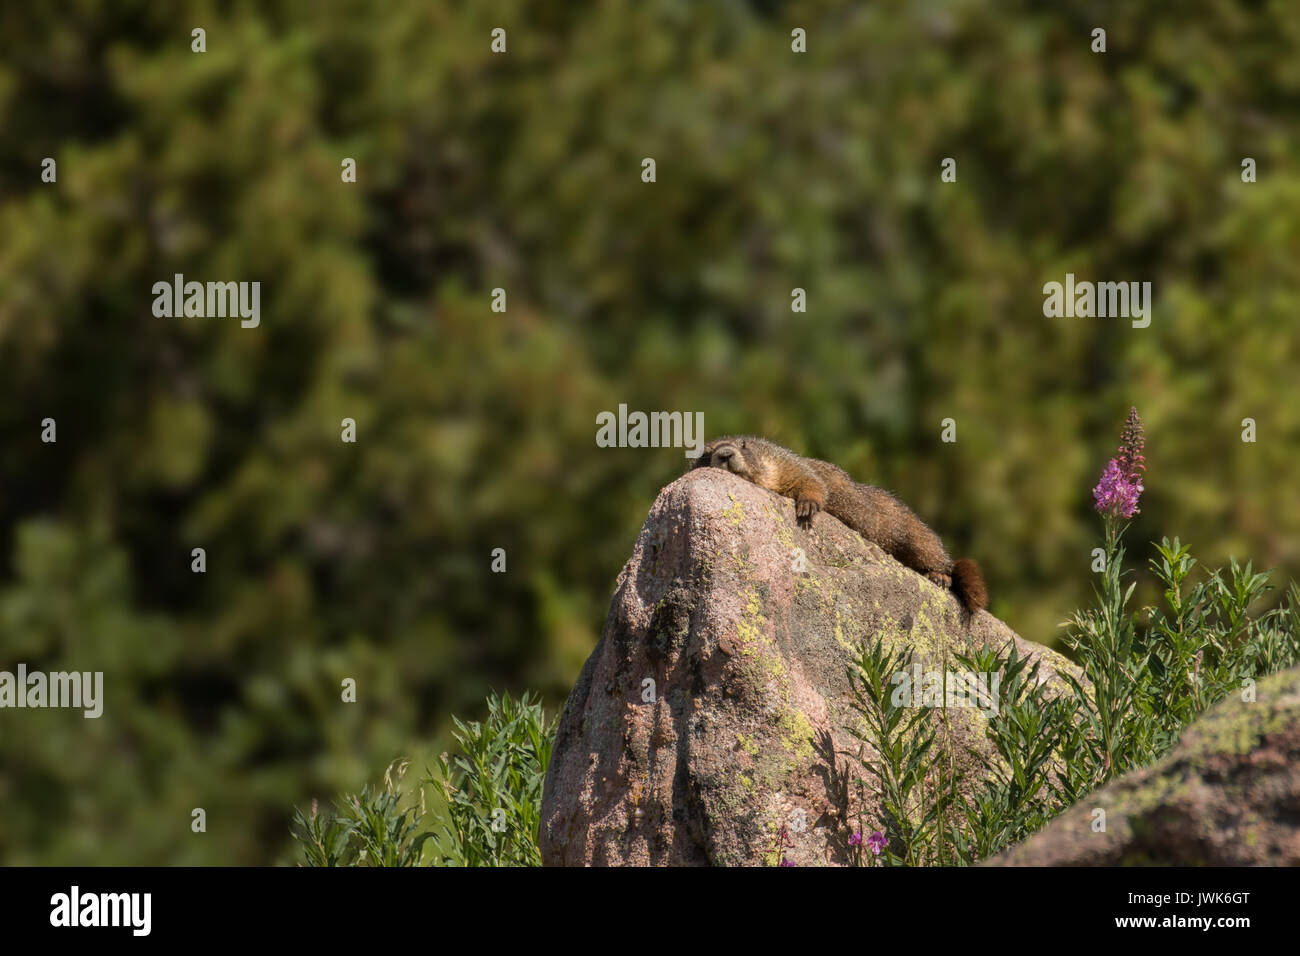 Yellow-bellied marmot soaking up the sun on a rock. Stock Photo